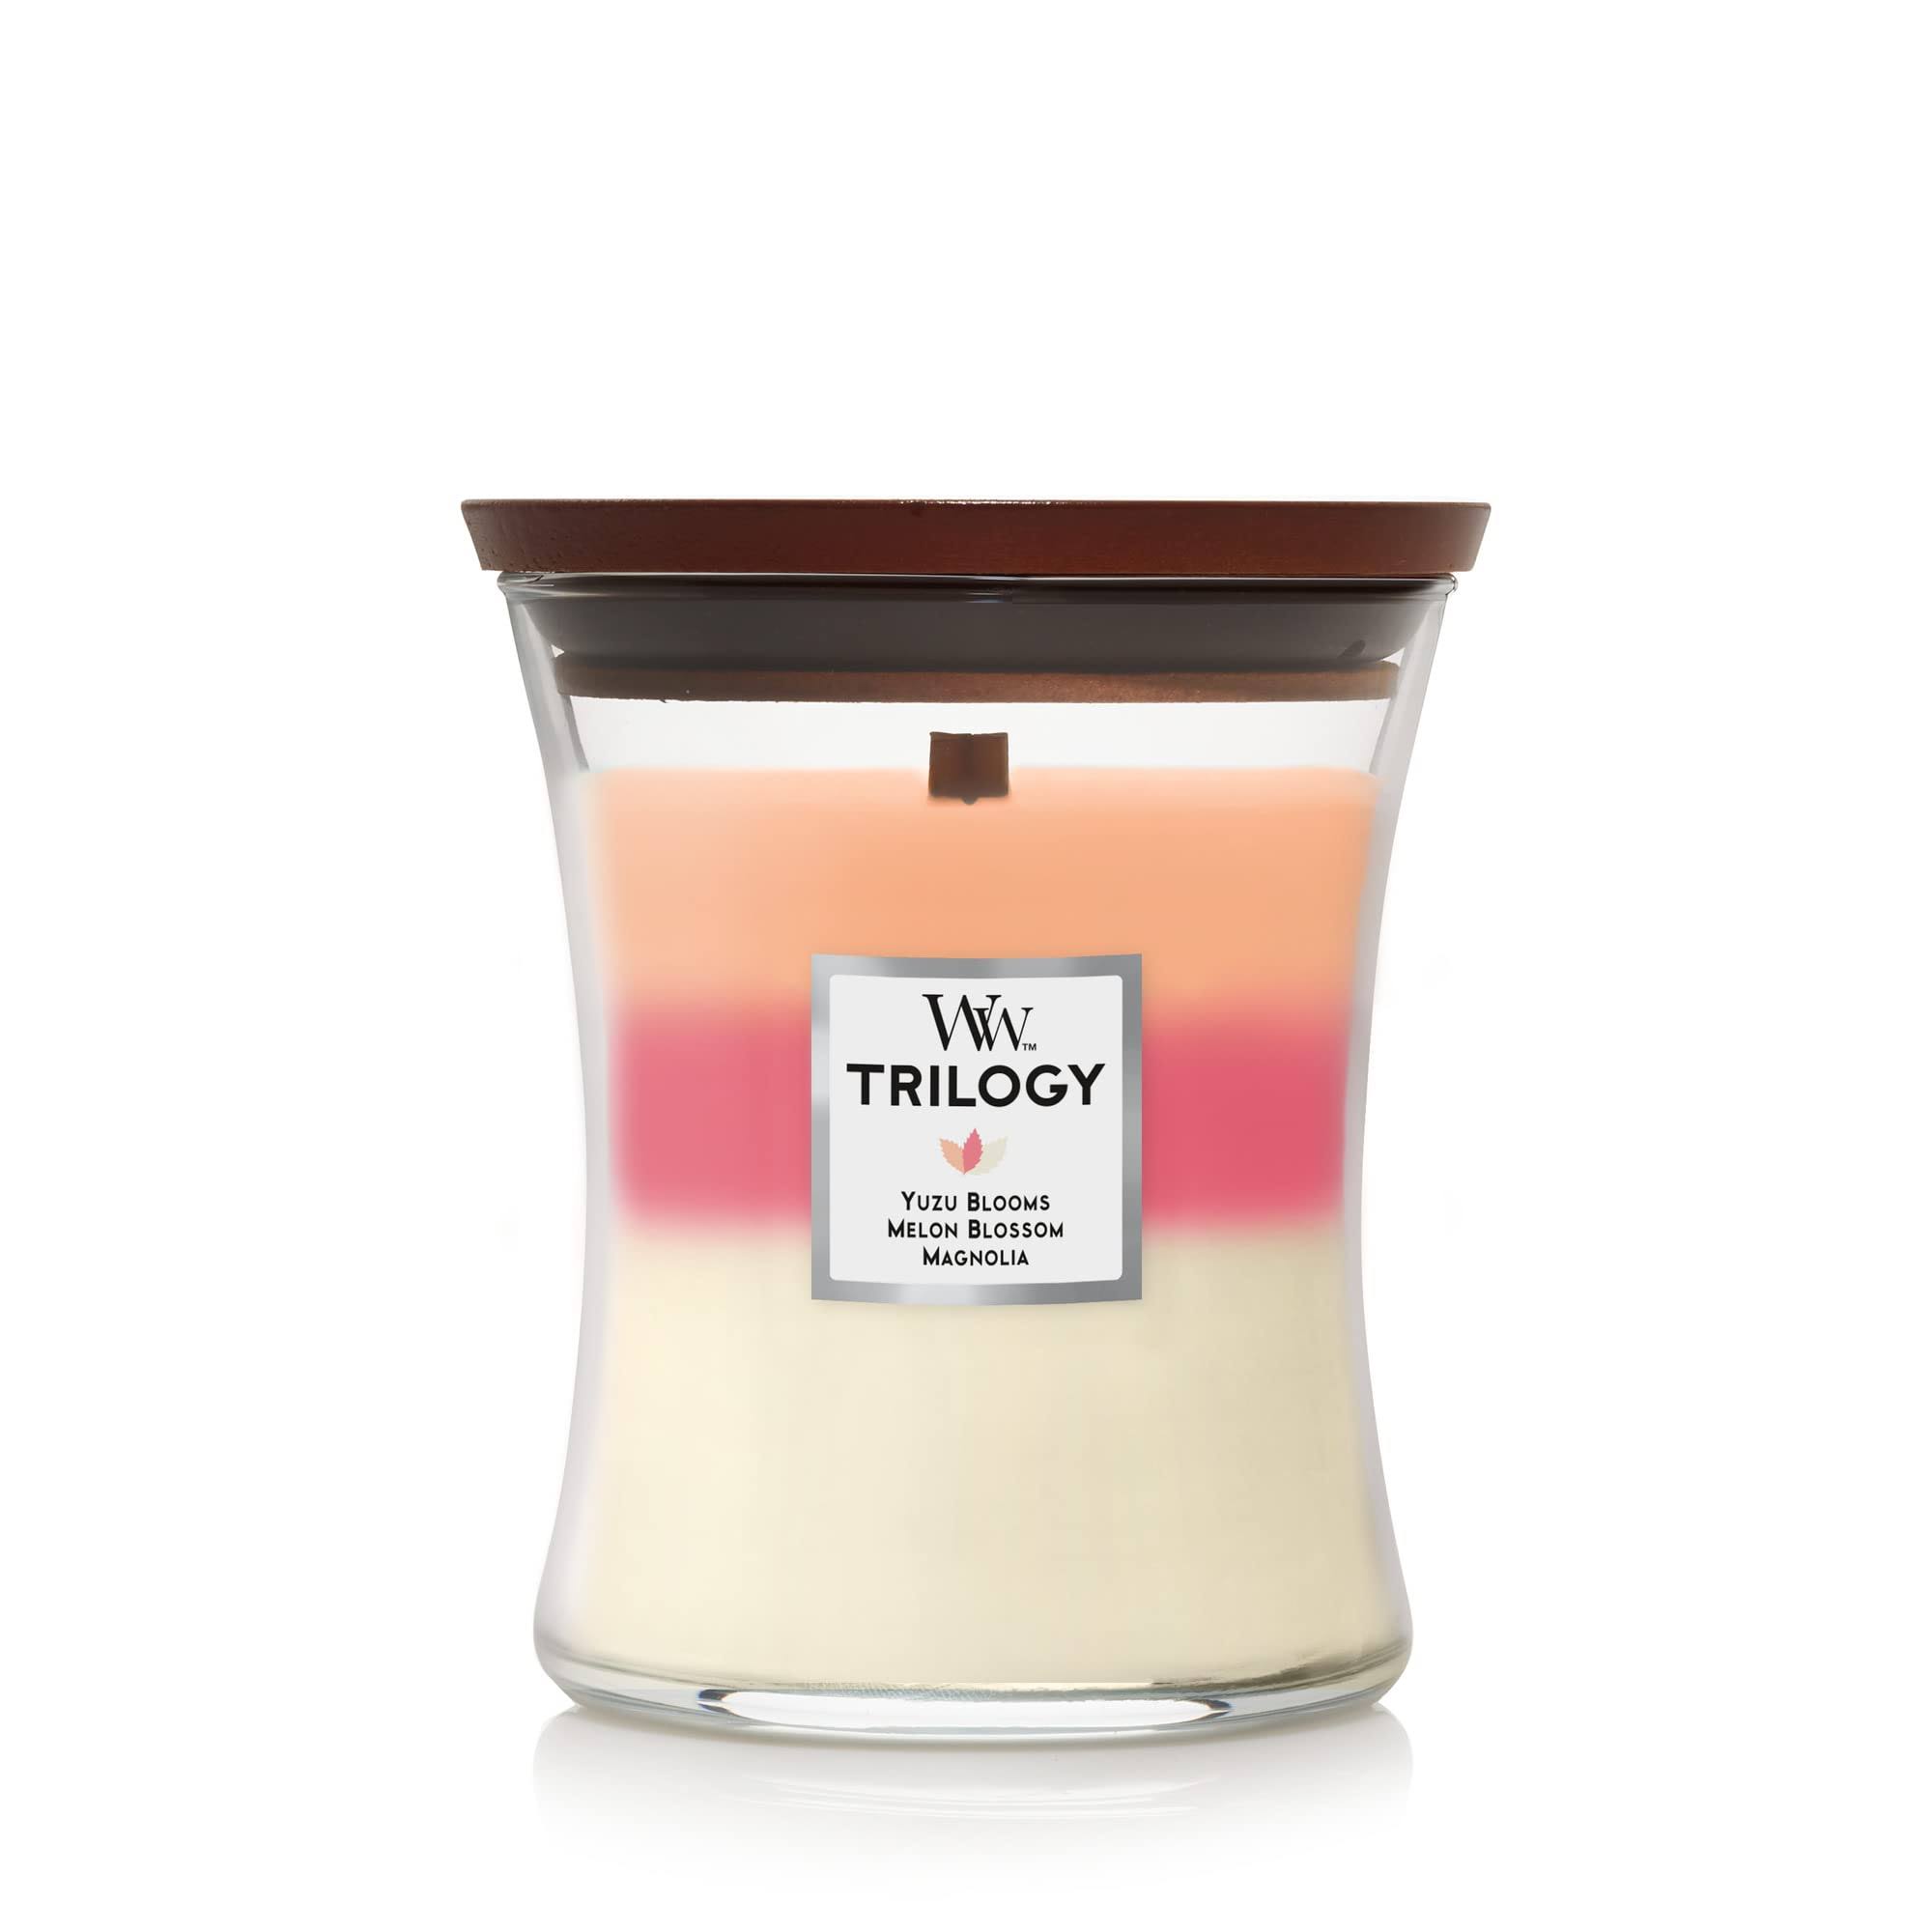 WoodWick Medium Hourglass Candle, Blooming Orchard Trilogy, 9.7 oz.